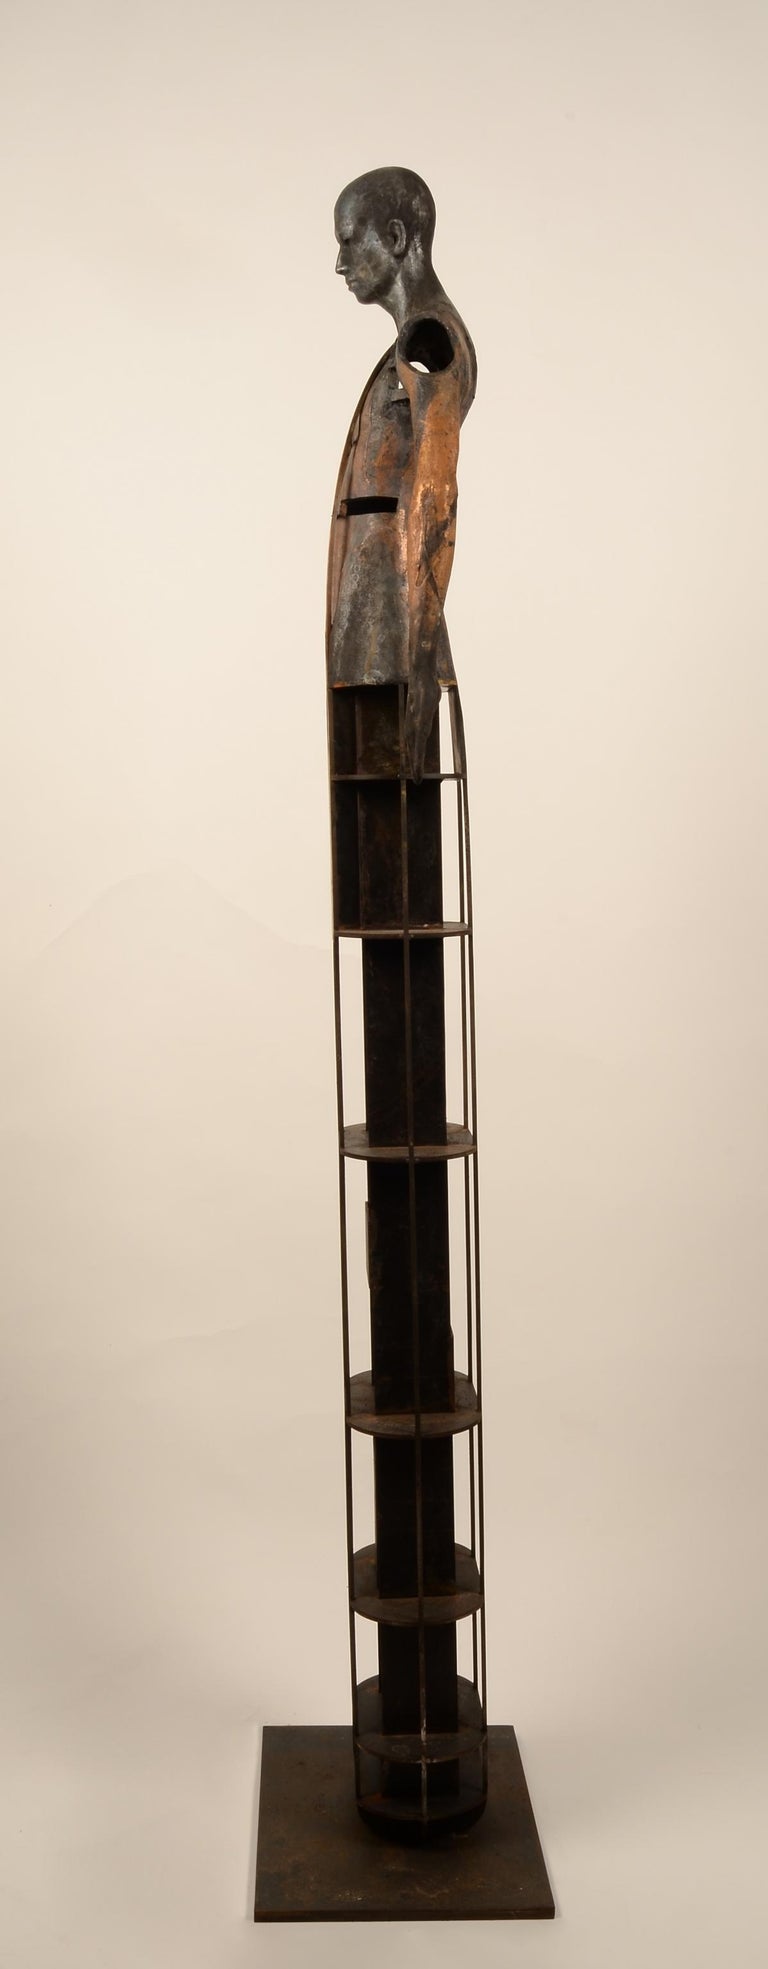 Jesús Curiá Perez
Construction II
bronze and iron
68.50h x 15.75w x 12d in
173.99h x 40.01w x 30.48d cm
JCP037

Jesús Curiá's sculptures arouse something more than purely aesthetic pleasure. We can analyze his work rationally and emphasize the